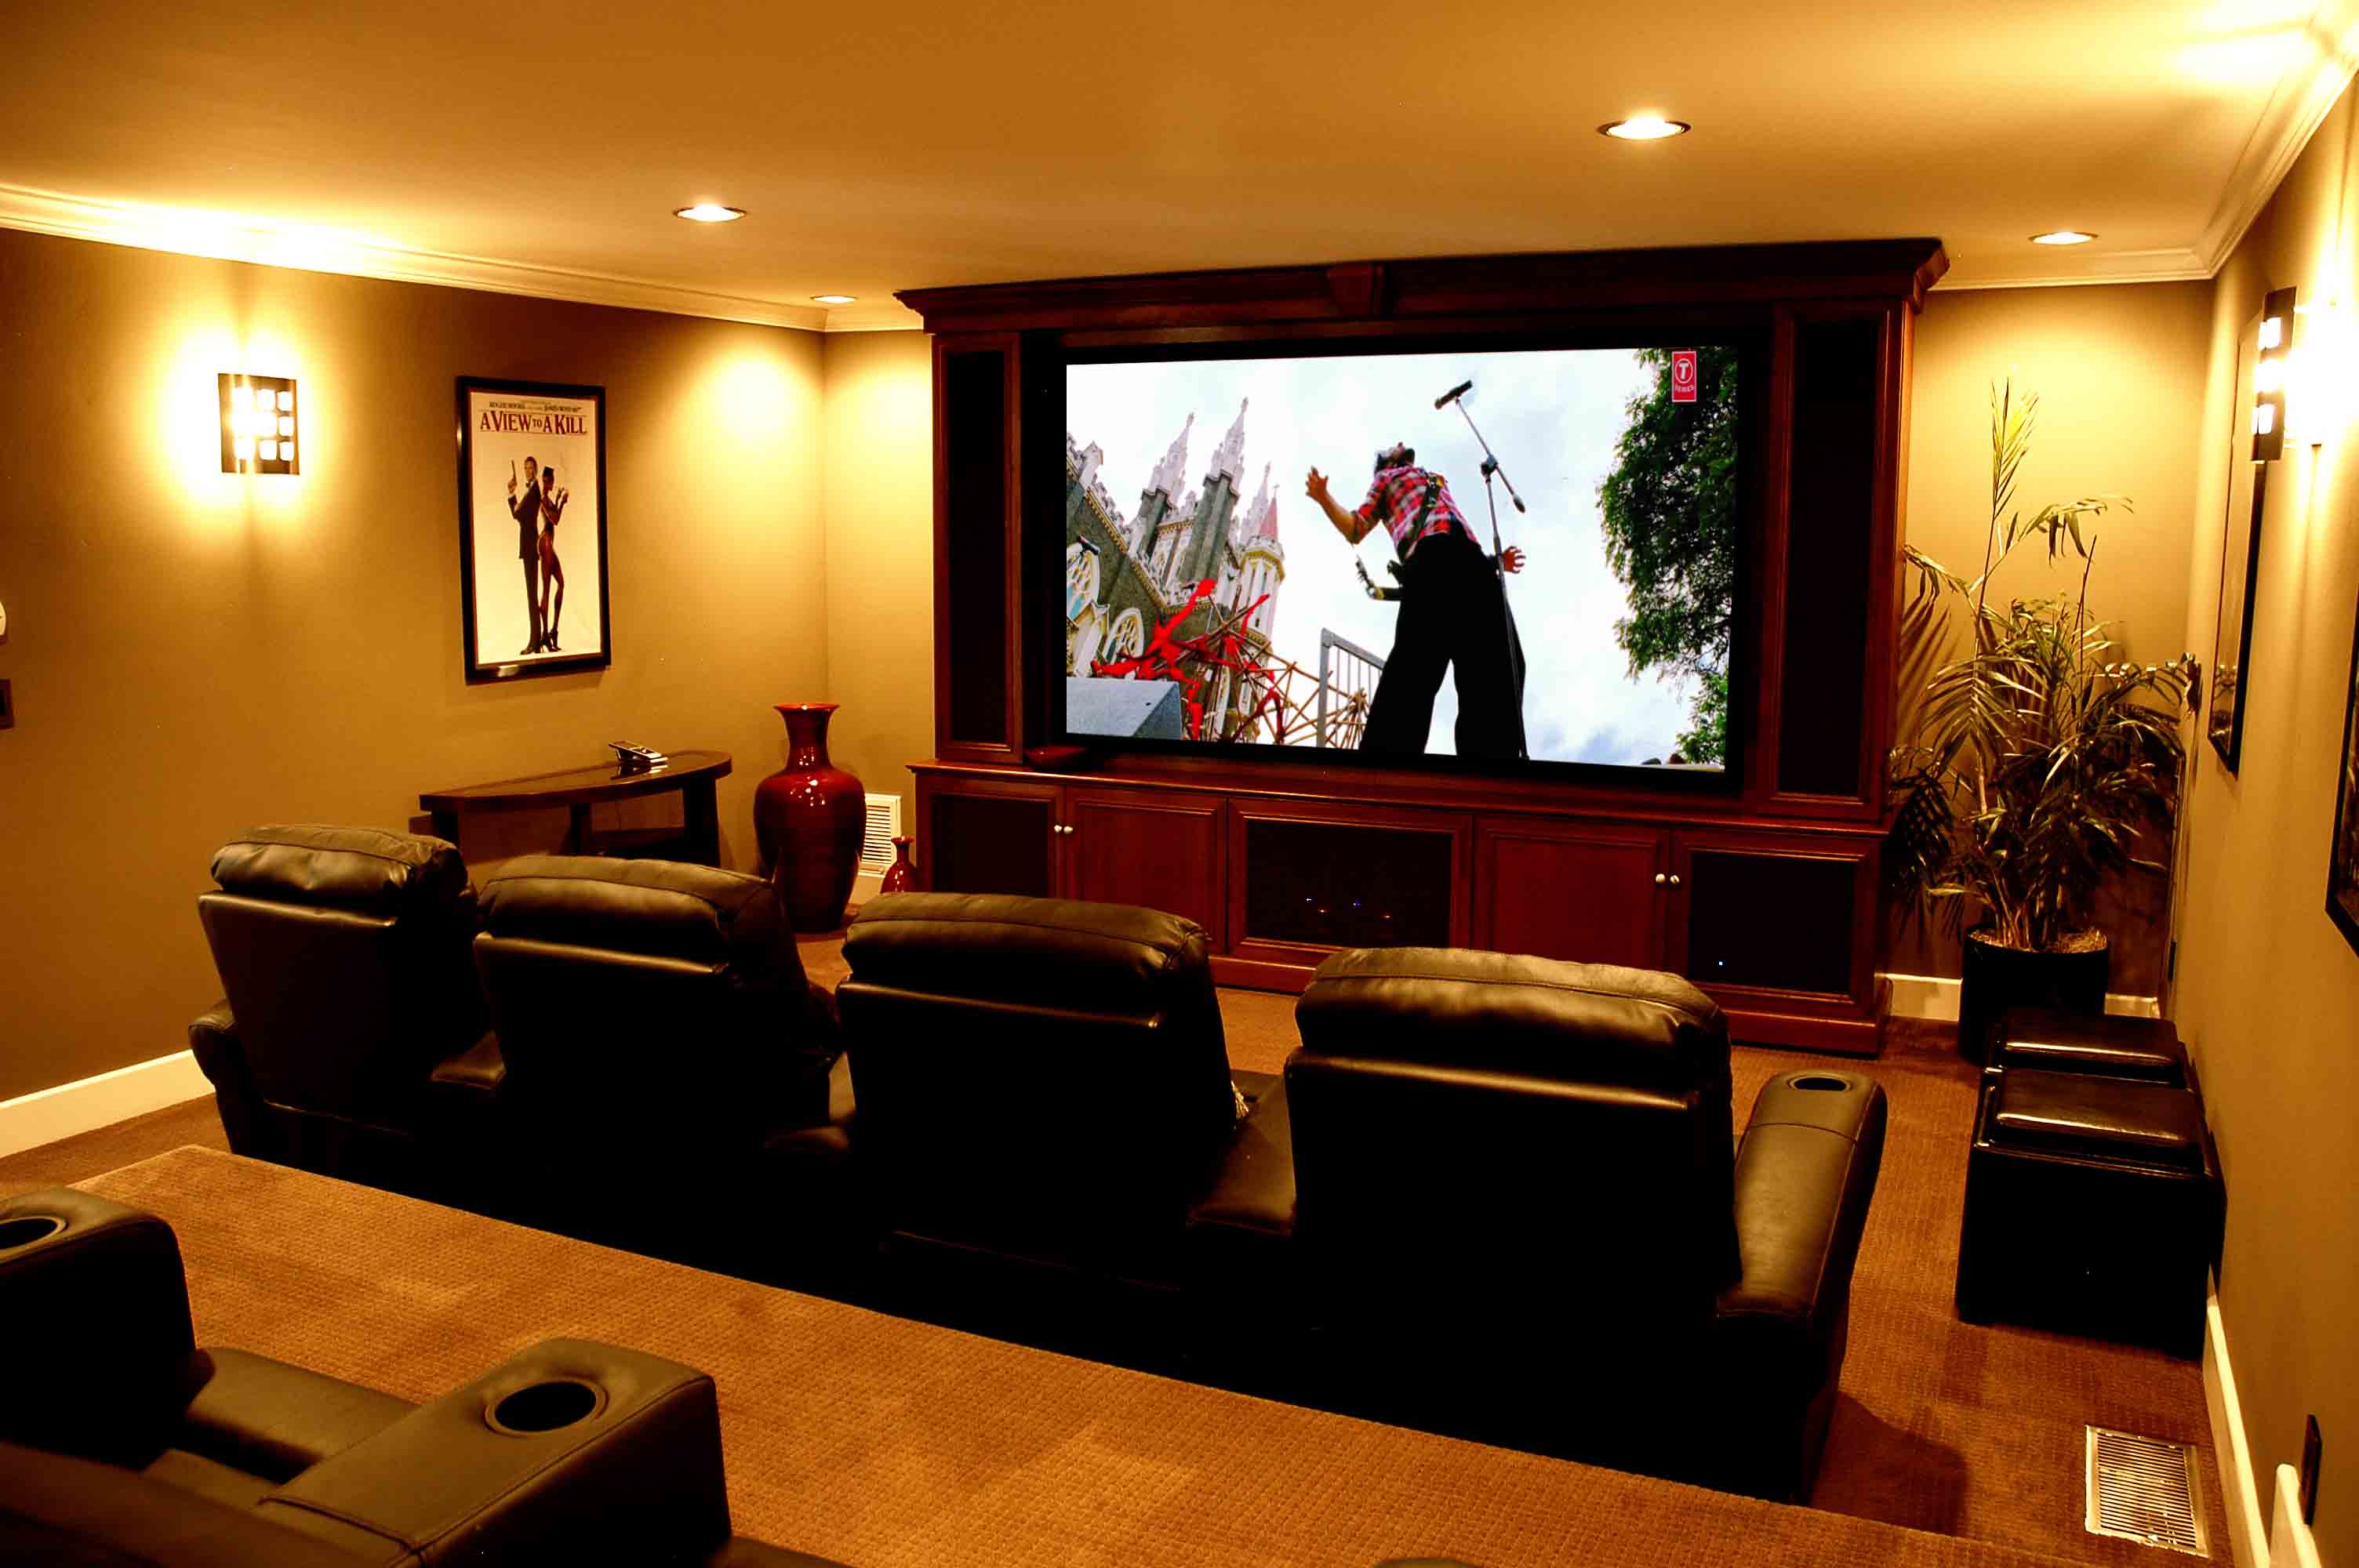 Home Theater Room Decor: Movie Magic At Home